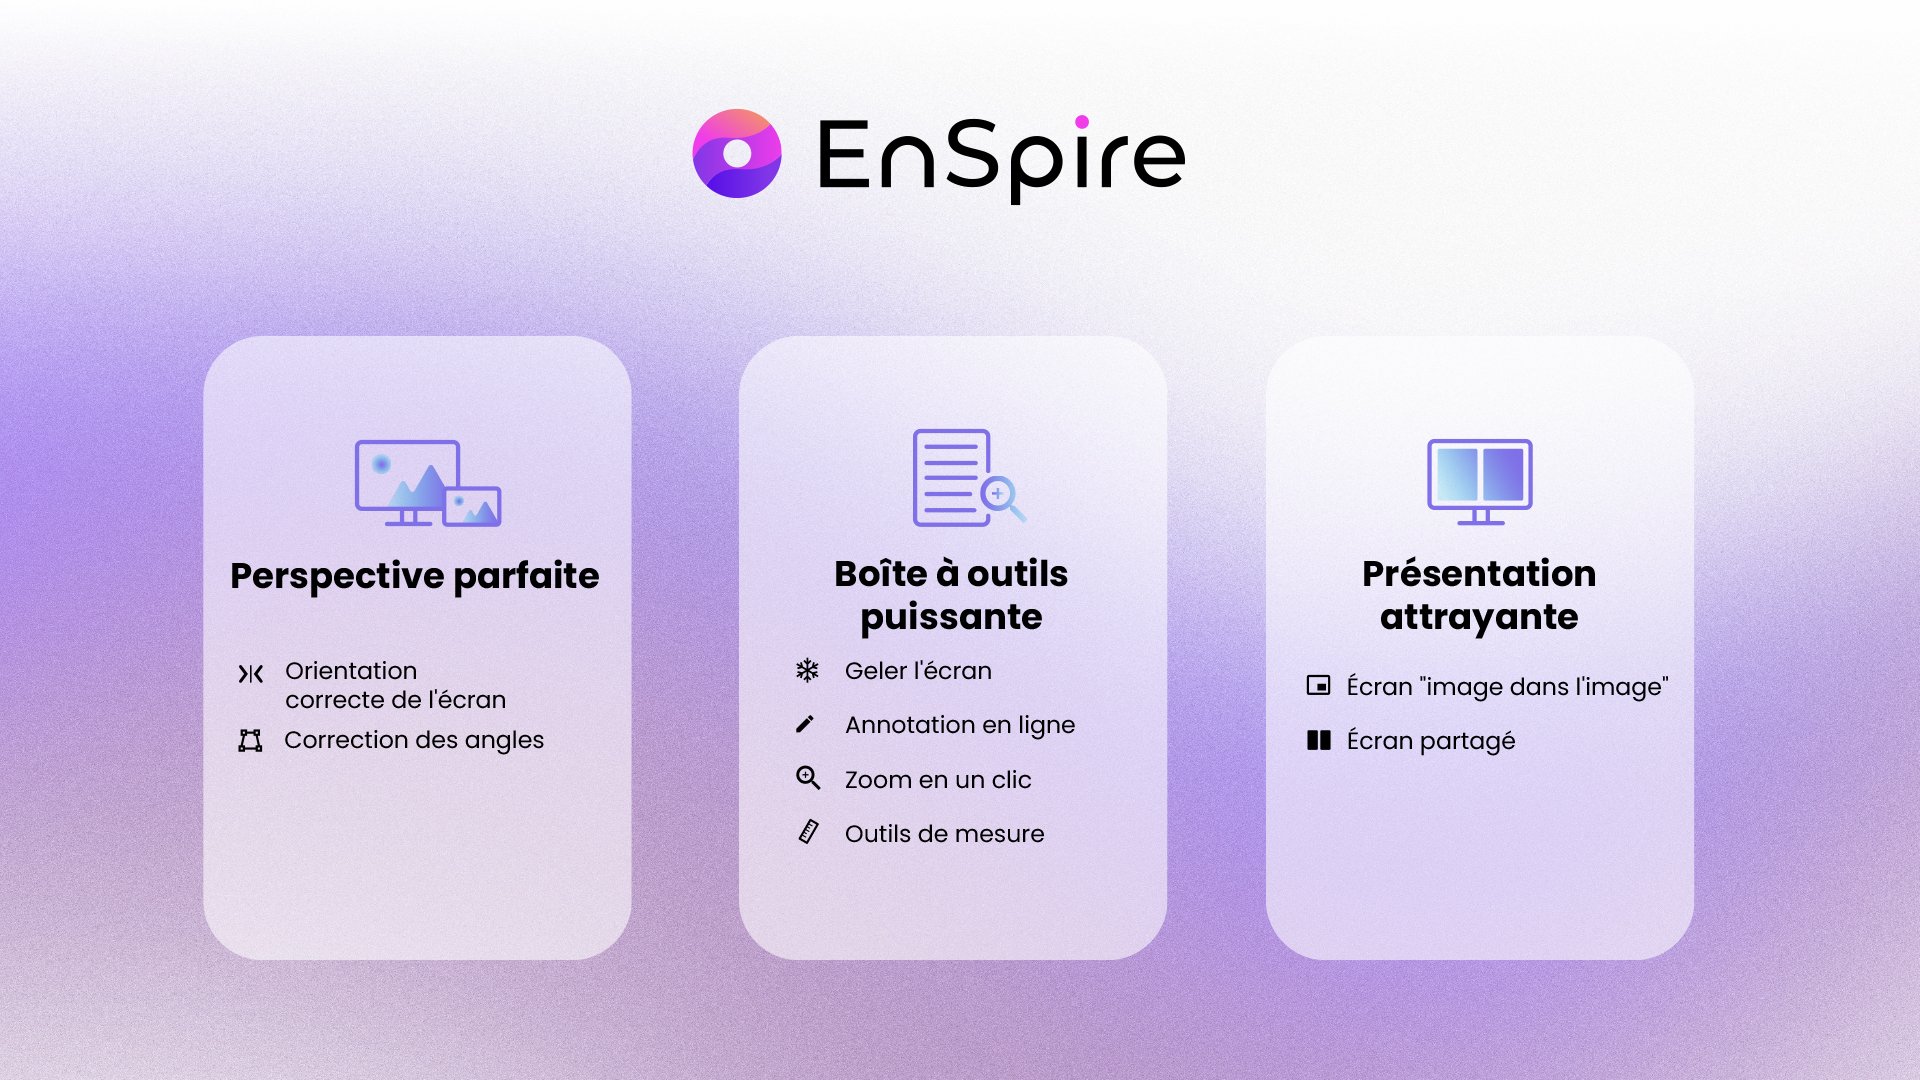 Improve video conferencing with EnSpire on Google Meet, Zoom, and Microsoft Teams.